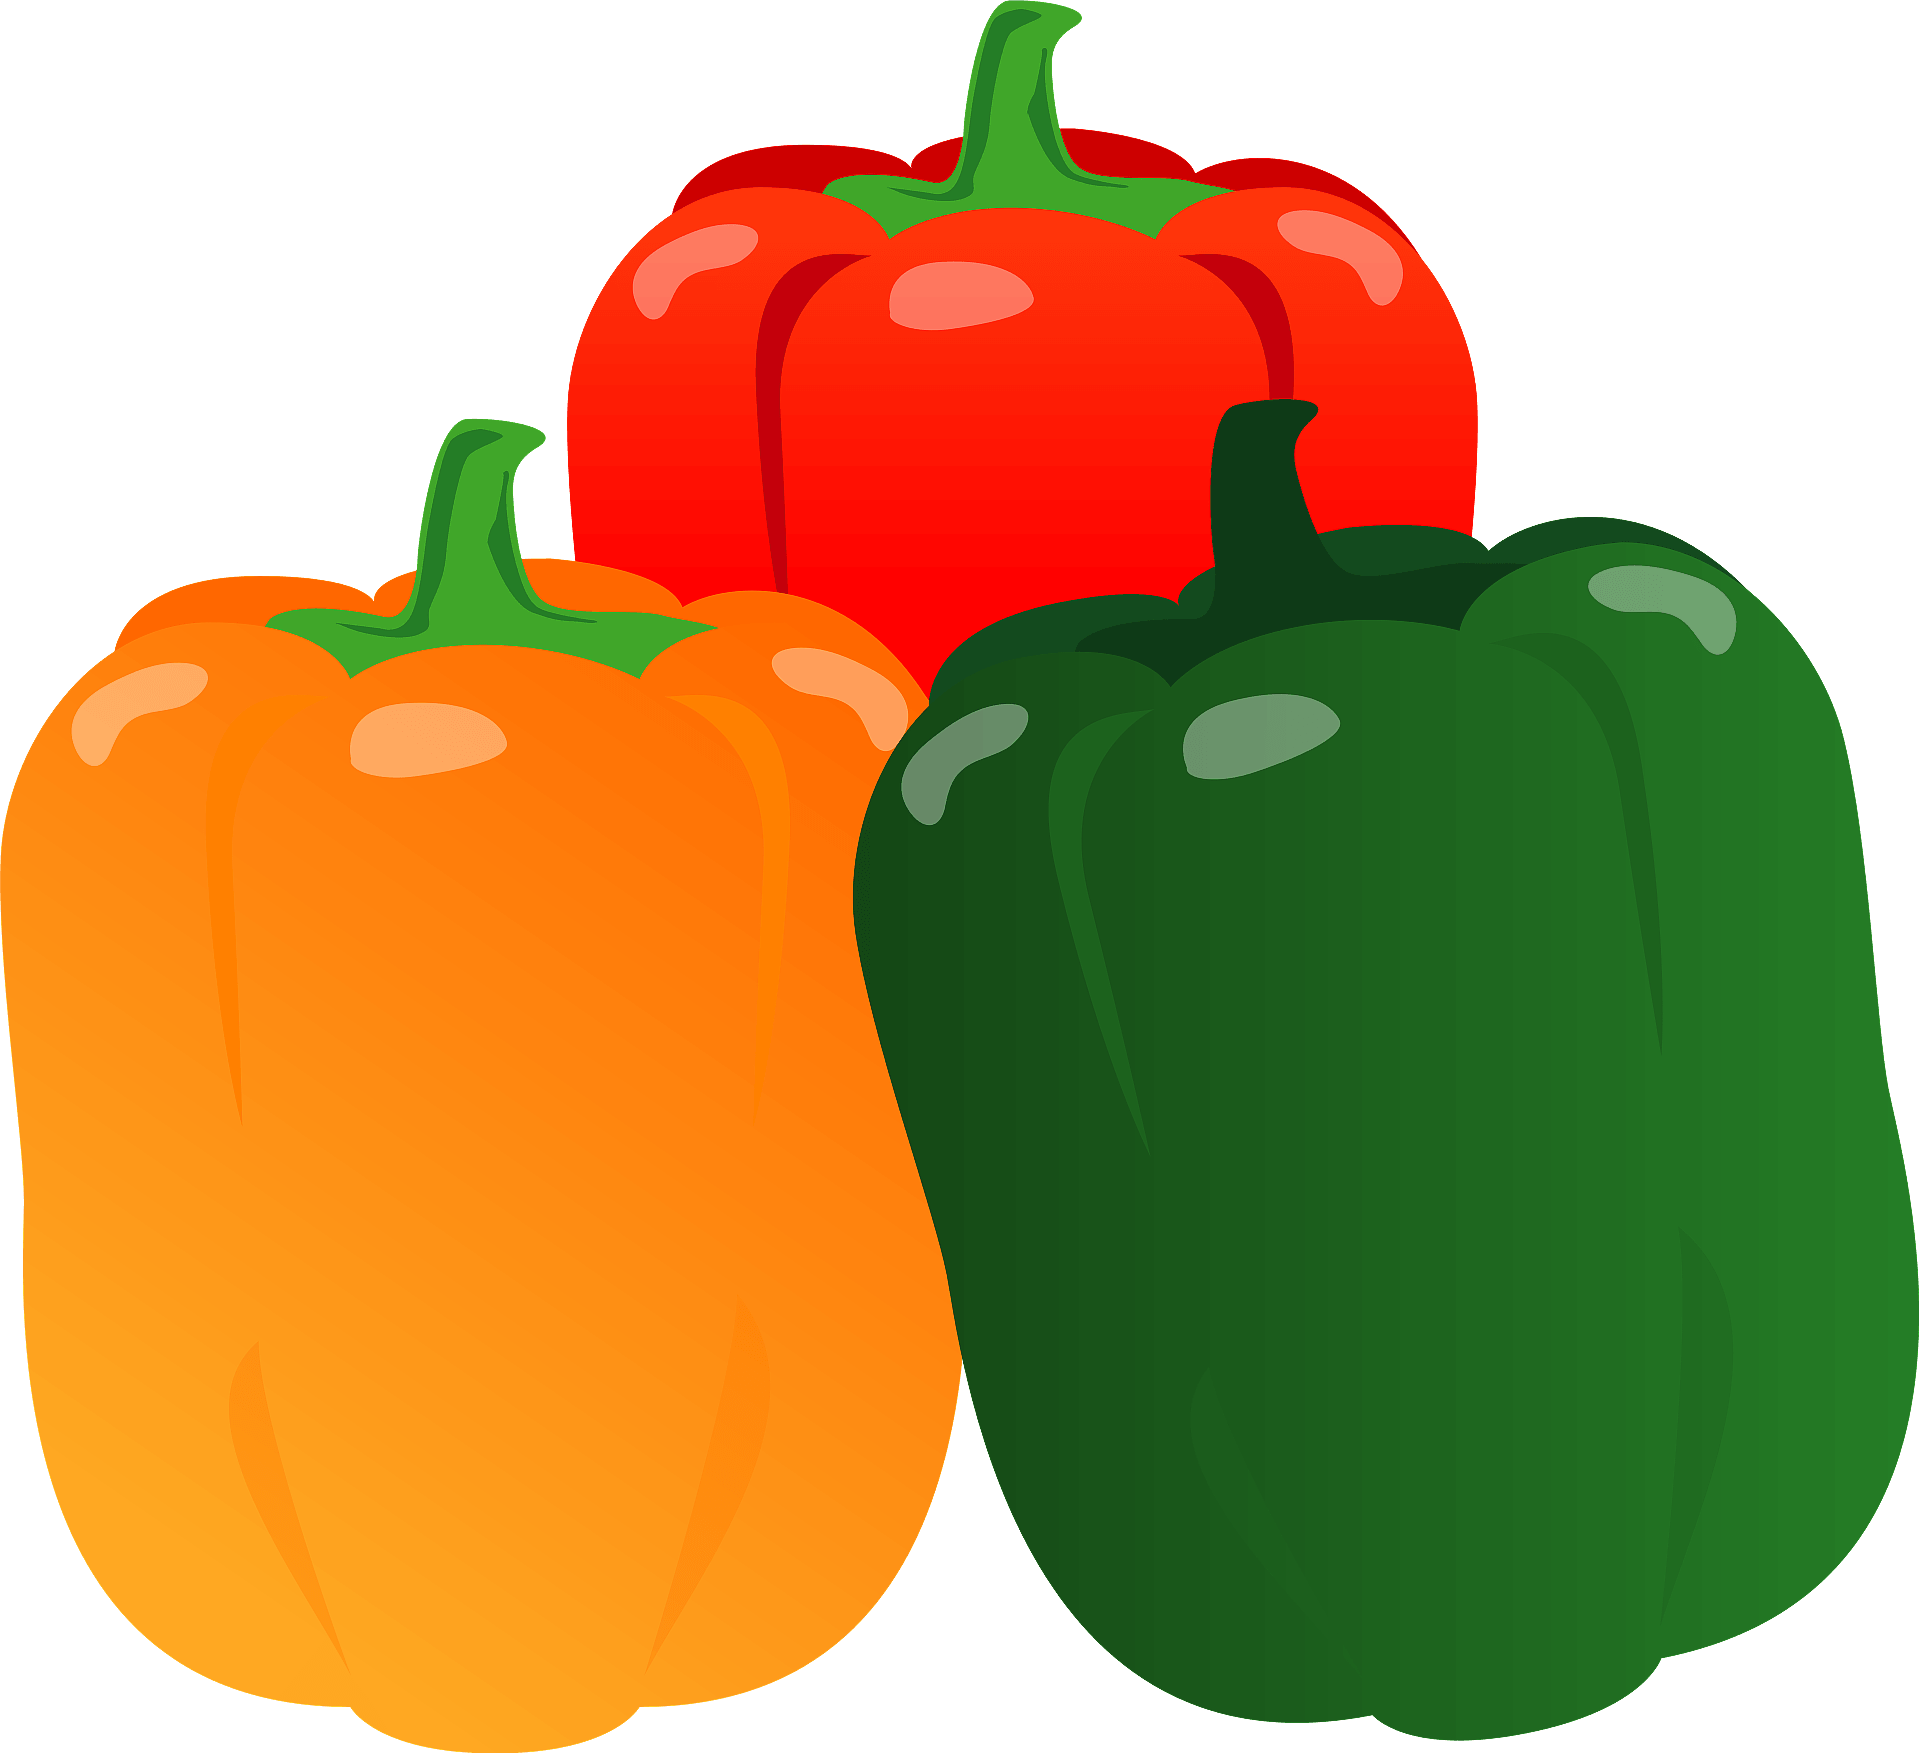 Multicolored Bell Peppers clipart. Free download transparent .PNG ...